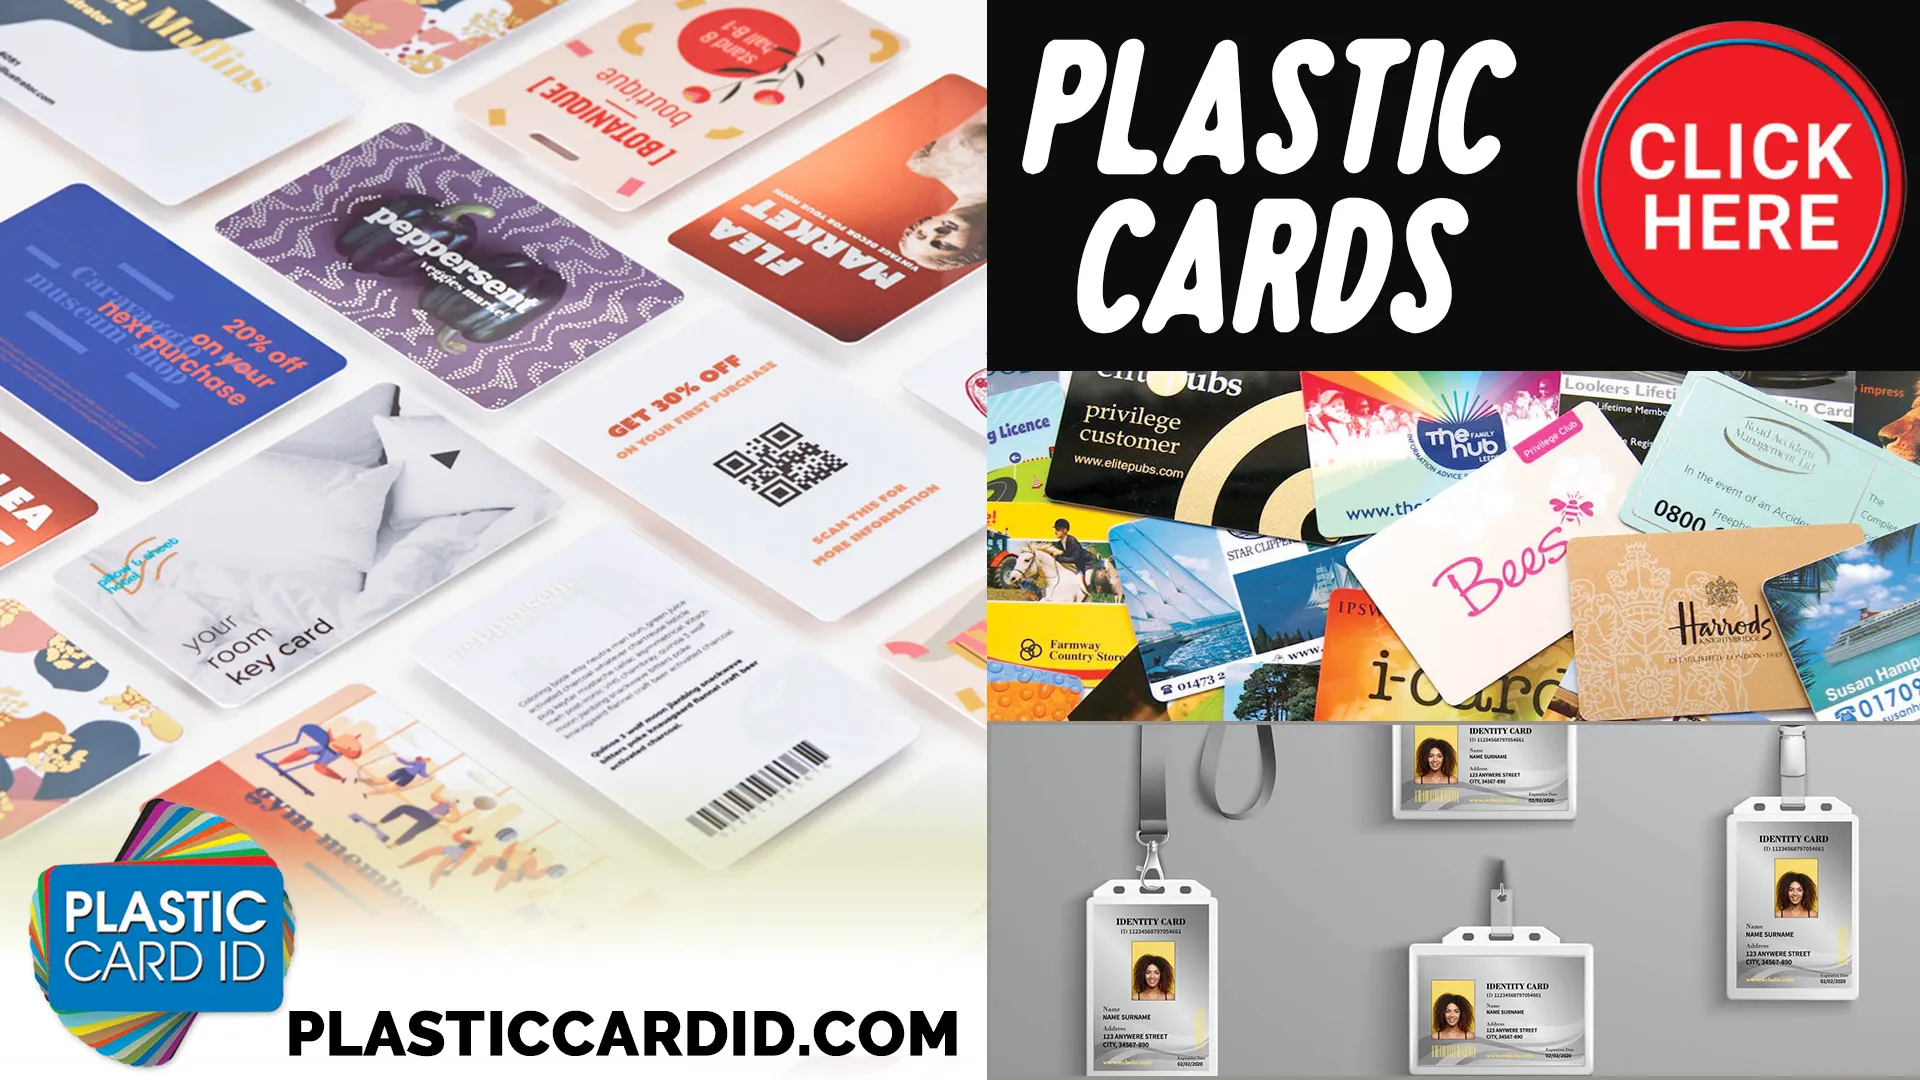 Transform Your Cards into Smart Business Tools with Plastic Card ID




